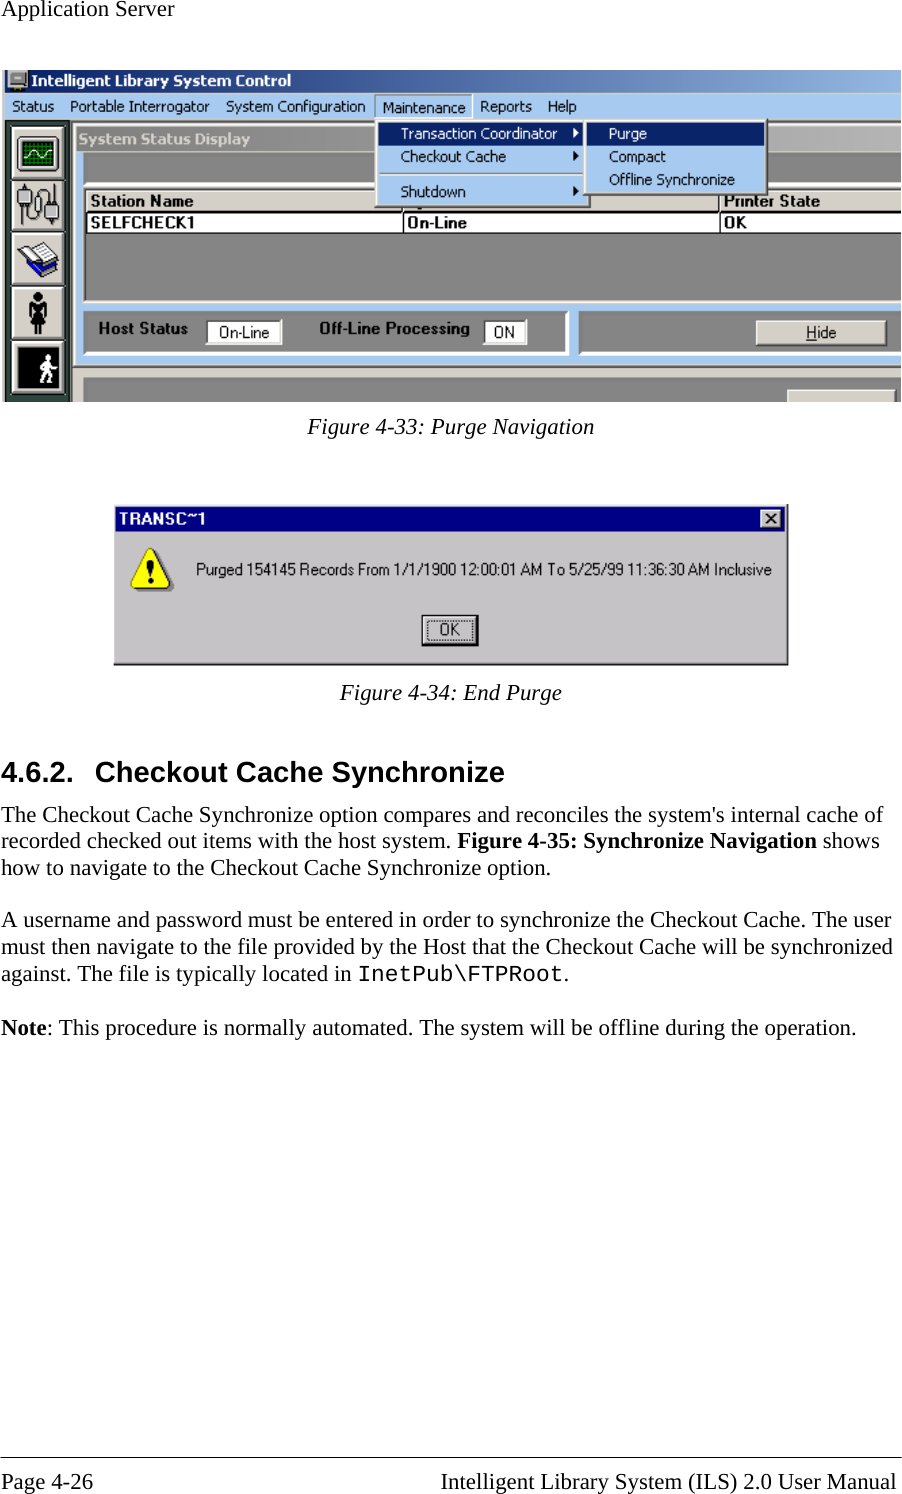 Application Server  Figure 4-33: Purge Navigation   Figure 4-34: End Purge 4.6.2.  Checkout Cache Synchronize  ares and reconciles the system&apos;s internal cache of chronize Navigation shows ption. A u n ser must th e provided by the Host that the Checkout Cache will be synchronized against. The tPub\FTPRoot.  Note: This  The Checkout Cache Synchronize option comprecorded checked out items with the host system. Figure 4-35: Synhow to navigate to the Checkout Cache Synchronize o ser ame and password must be entered in order to synchronize the Checkout Cache. The uen navigate to the fil file is typically located in Ineprocedure is normally automated. The system will be offline during the operation.  Page 4-26                                                       Intelligent Library System (ILS) 2.0 User Manual 